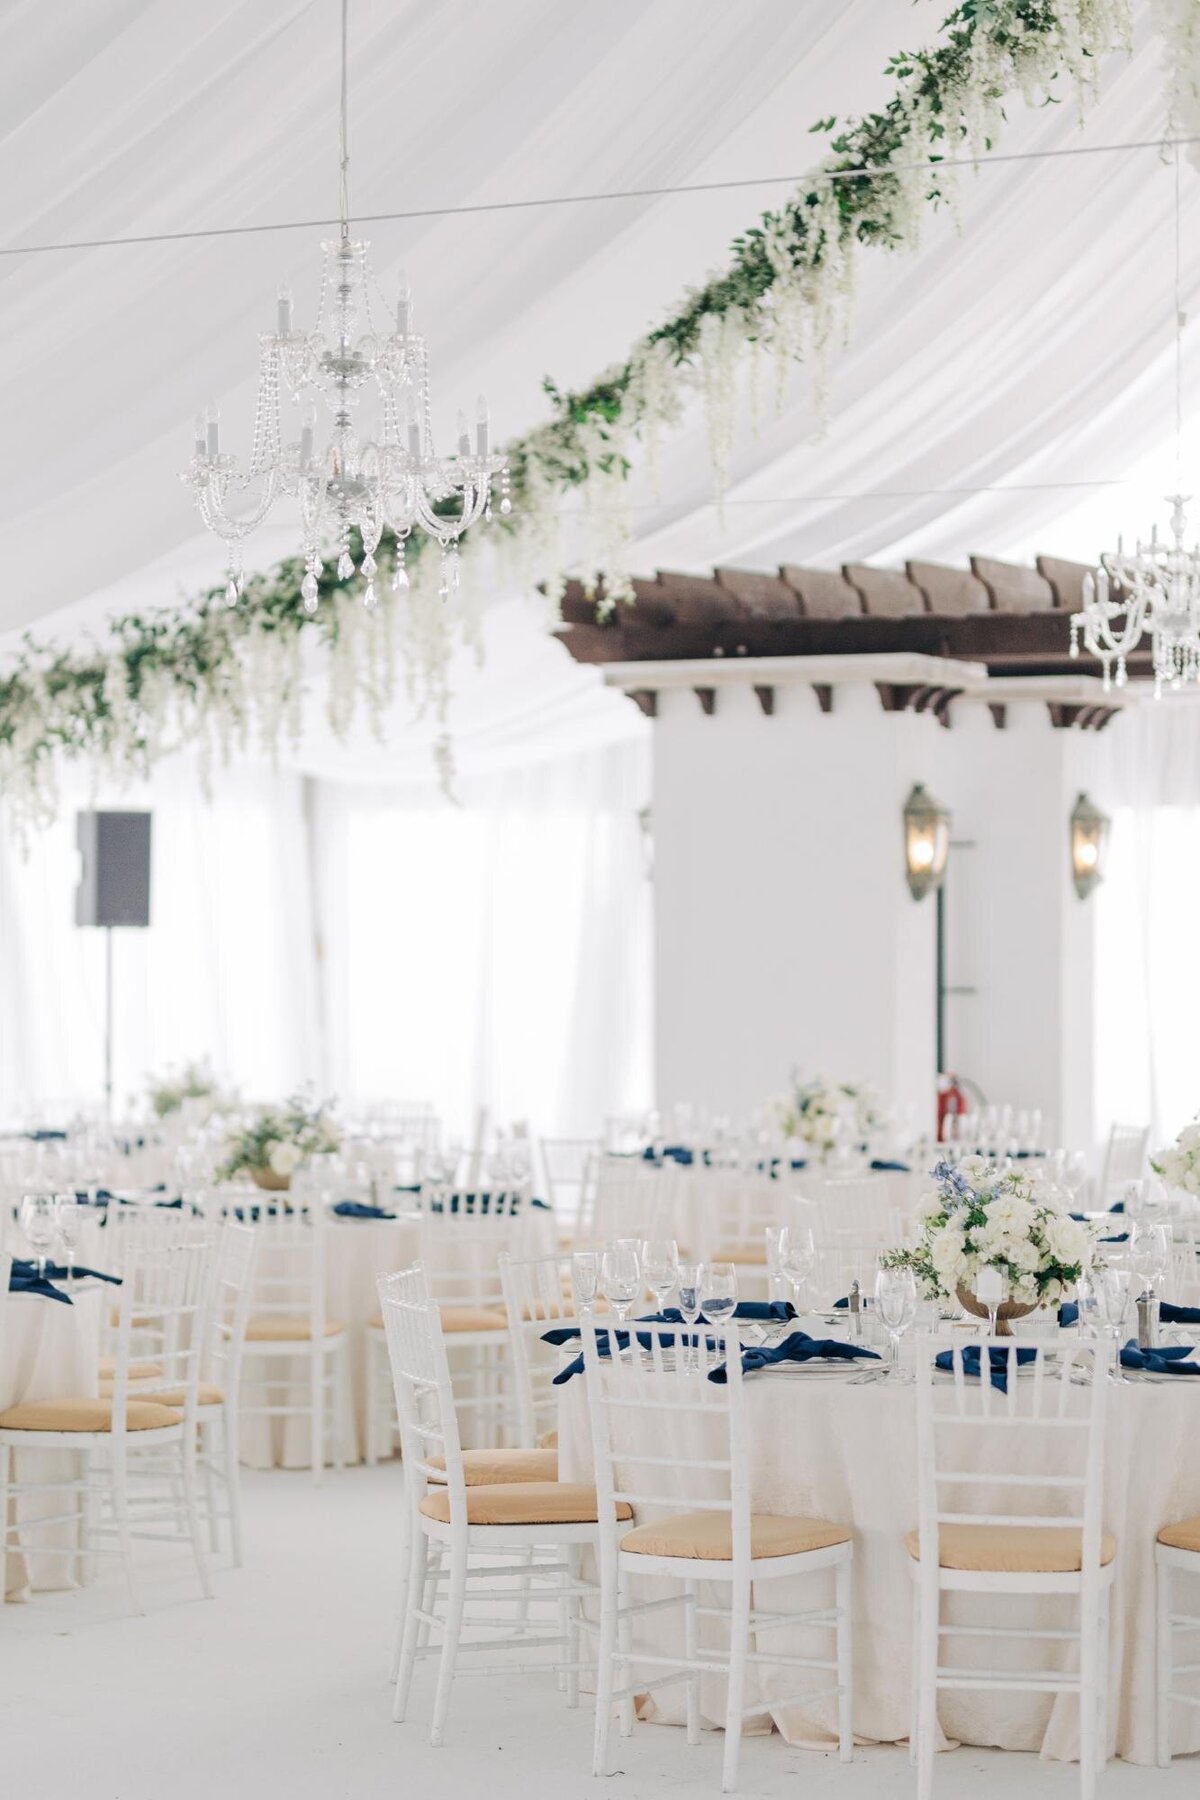 Elegant wedding reception setup inside a white tent with chandeliers, white chairs with blue ribbons, and floral decorations.